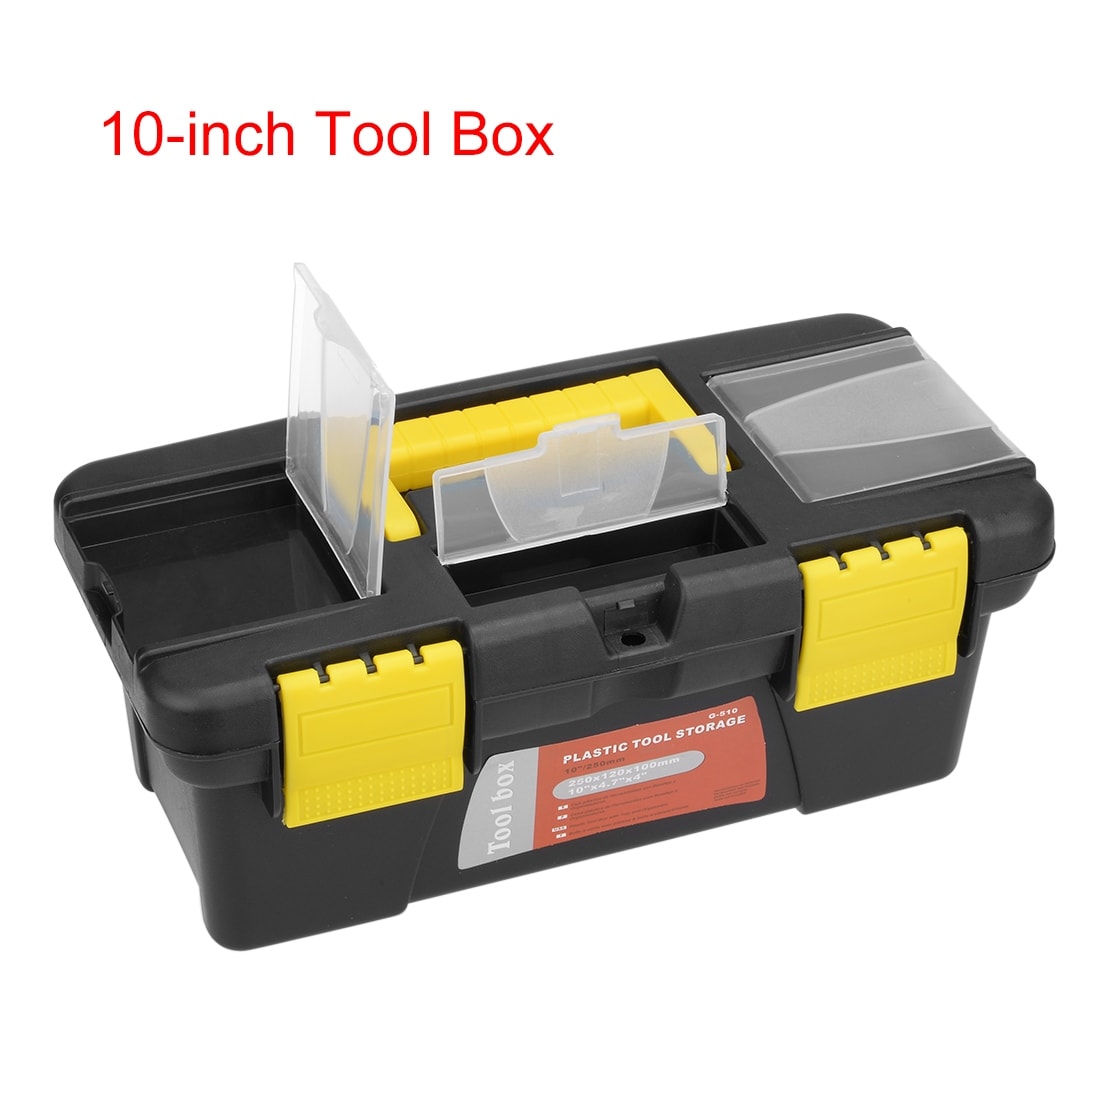 Utoolmart 10-Inch Tool Box, Plastic Tool Box with Removable Tool Tray,Organizer and Storage for Tools,Parts,Toys, Art 9.8 x 4